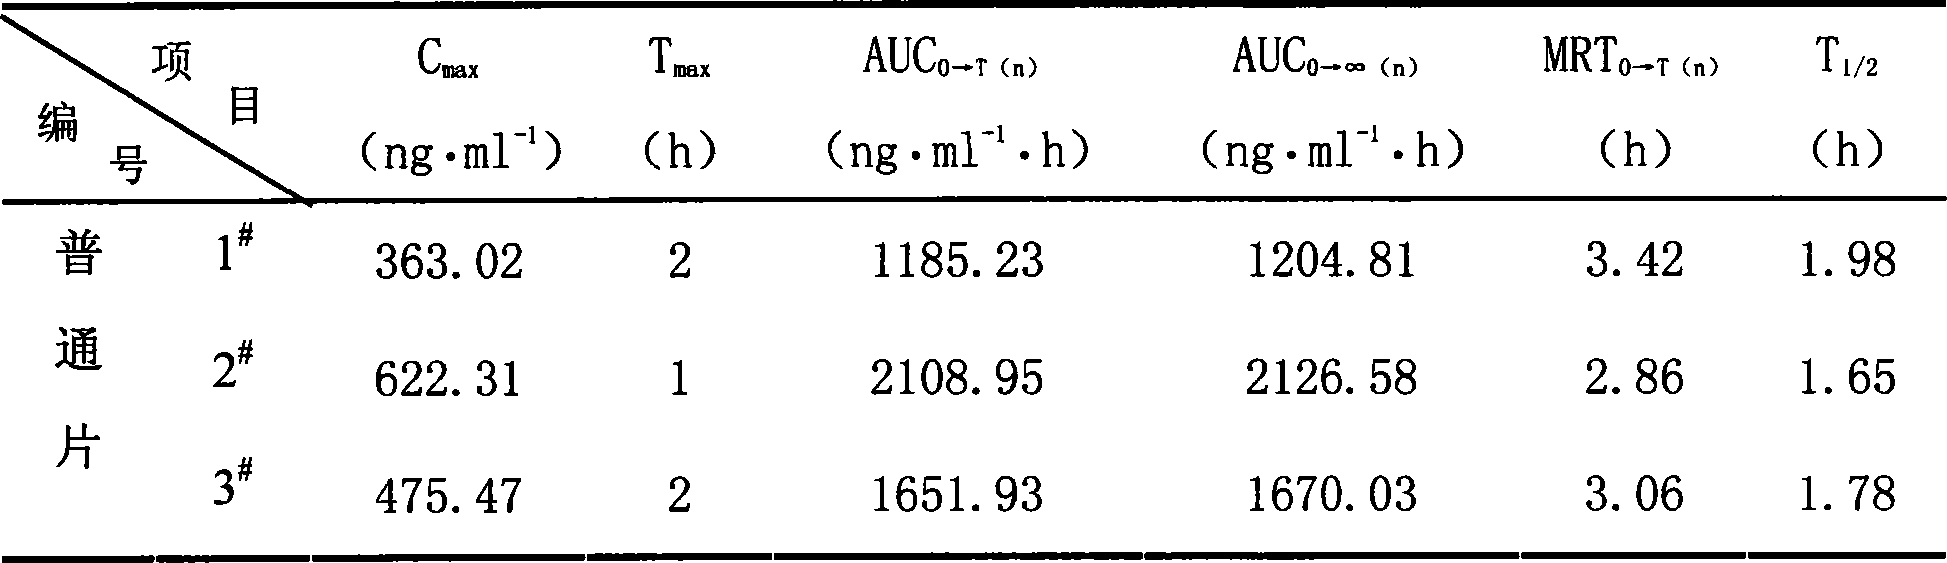 Composition of slow (controled) releasing preparation of Quetiadine Hemifumarate, and application